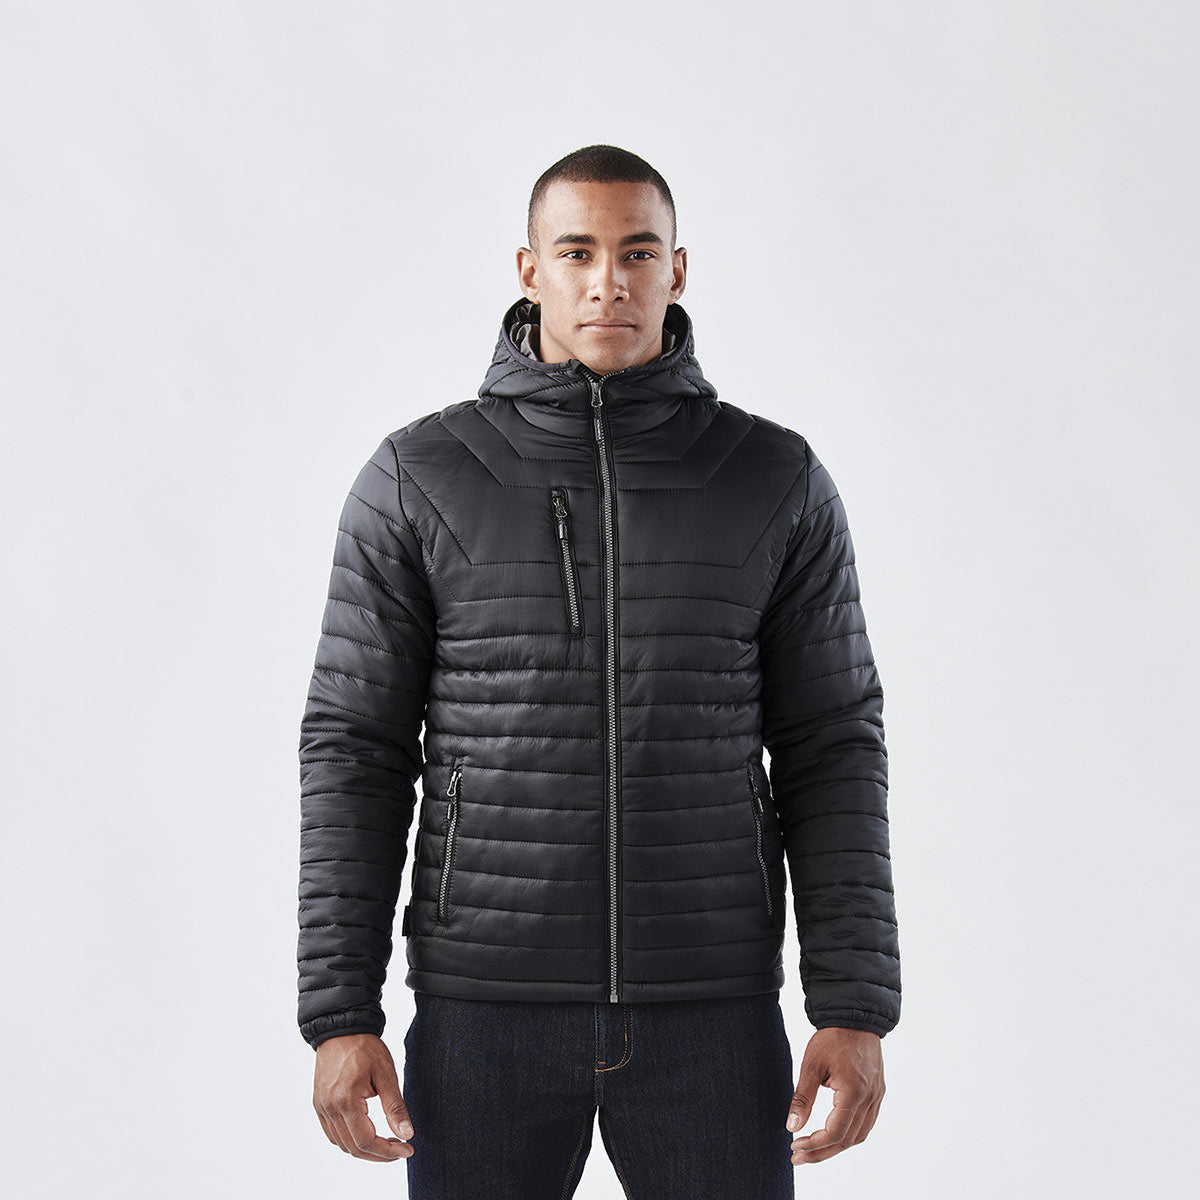 Men's Thermal Outerwear